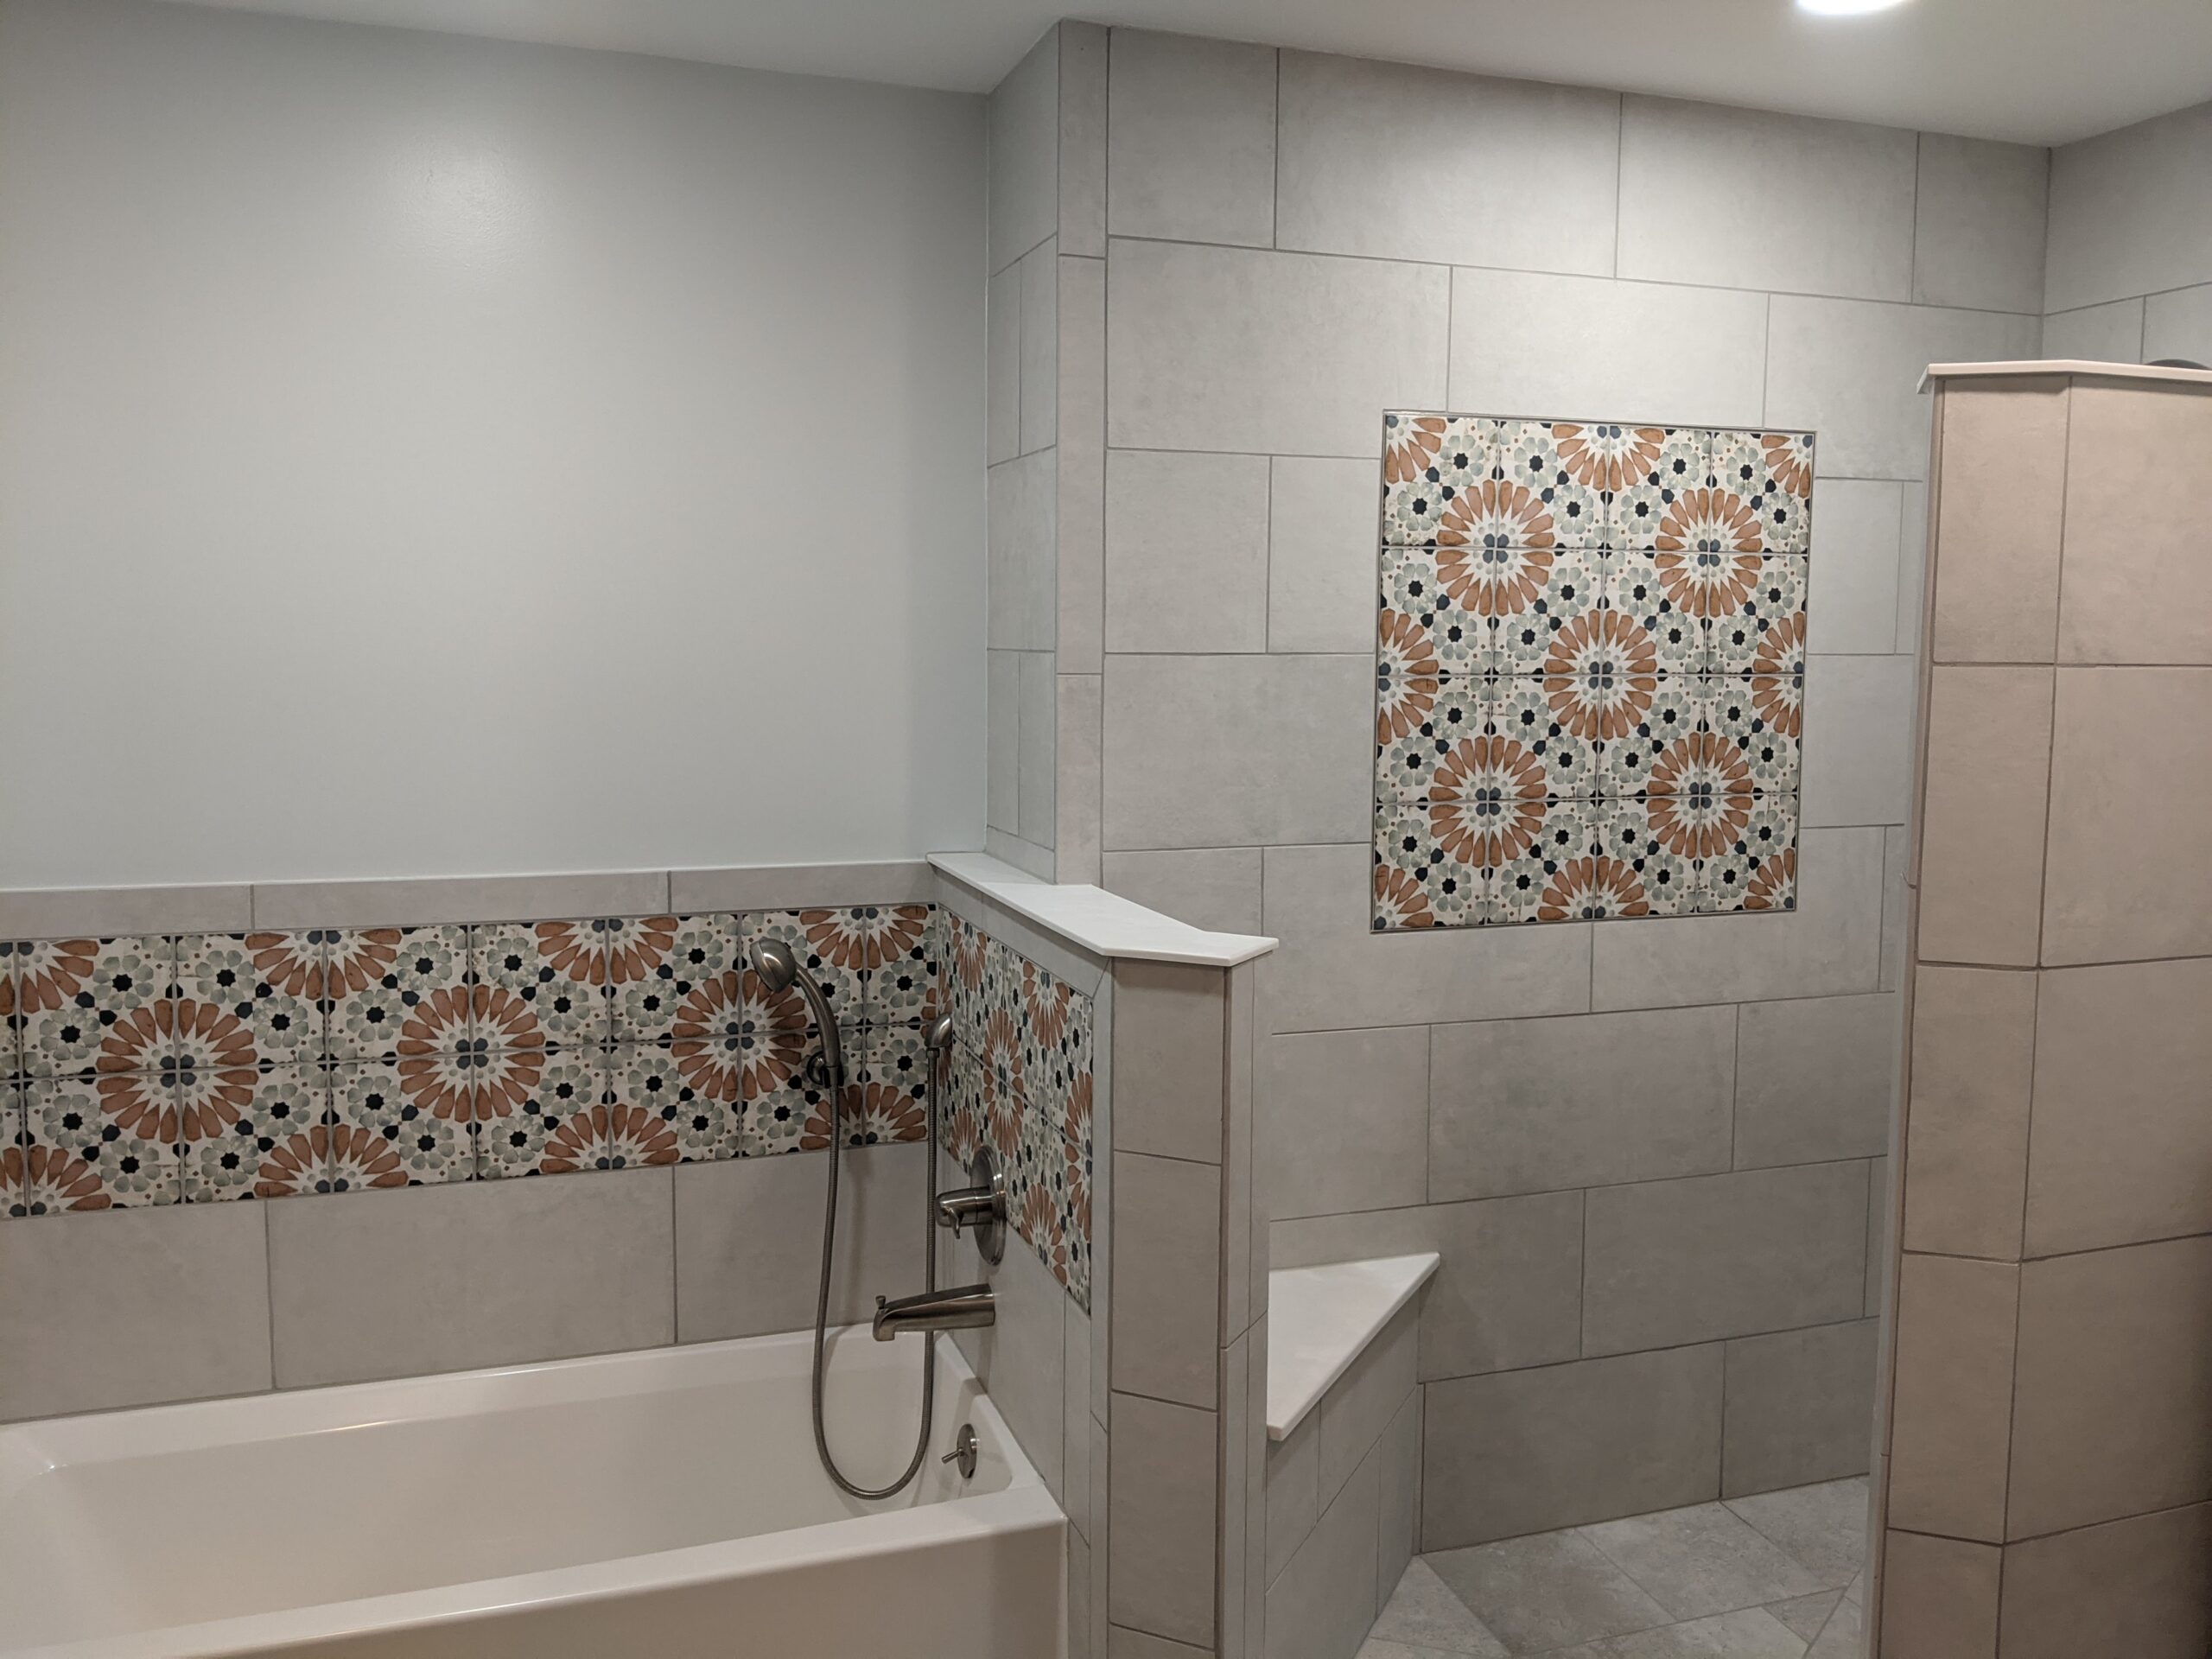 Tiled walls with decorative tile inserts allow the shower and tub areas to flow into eachother